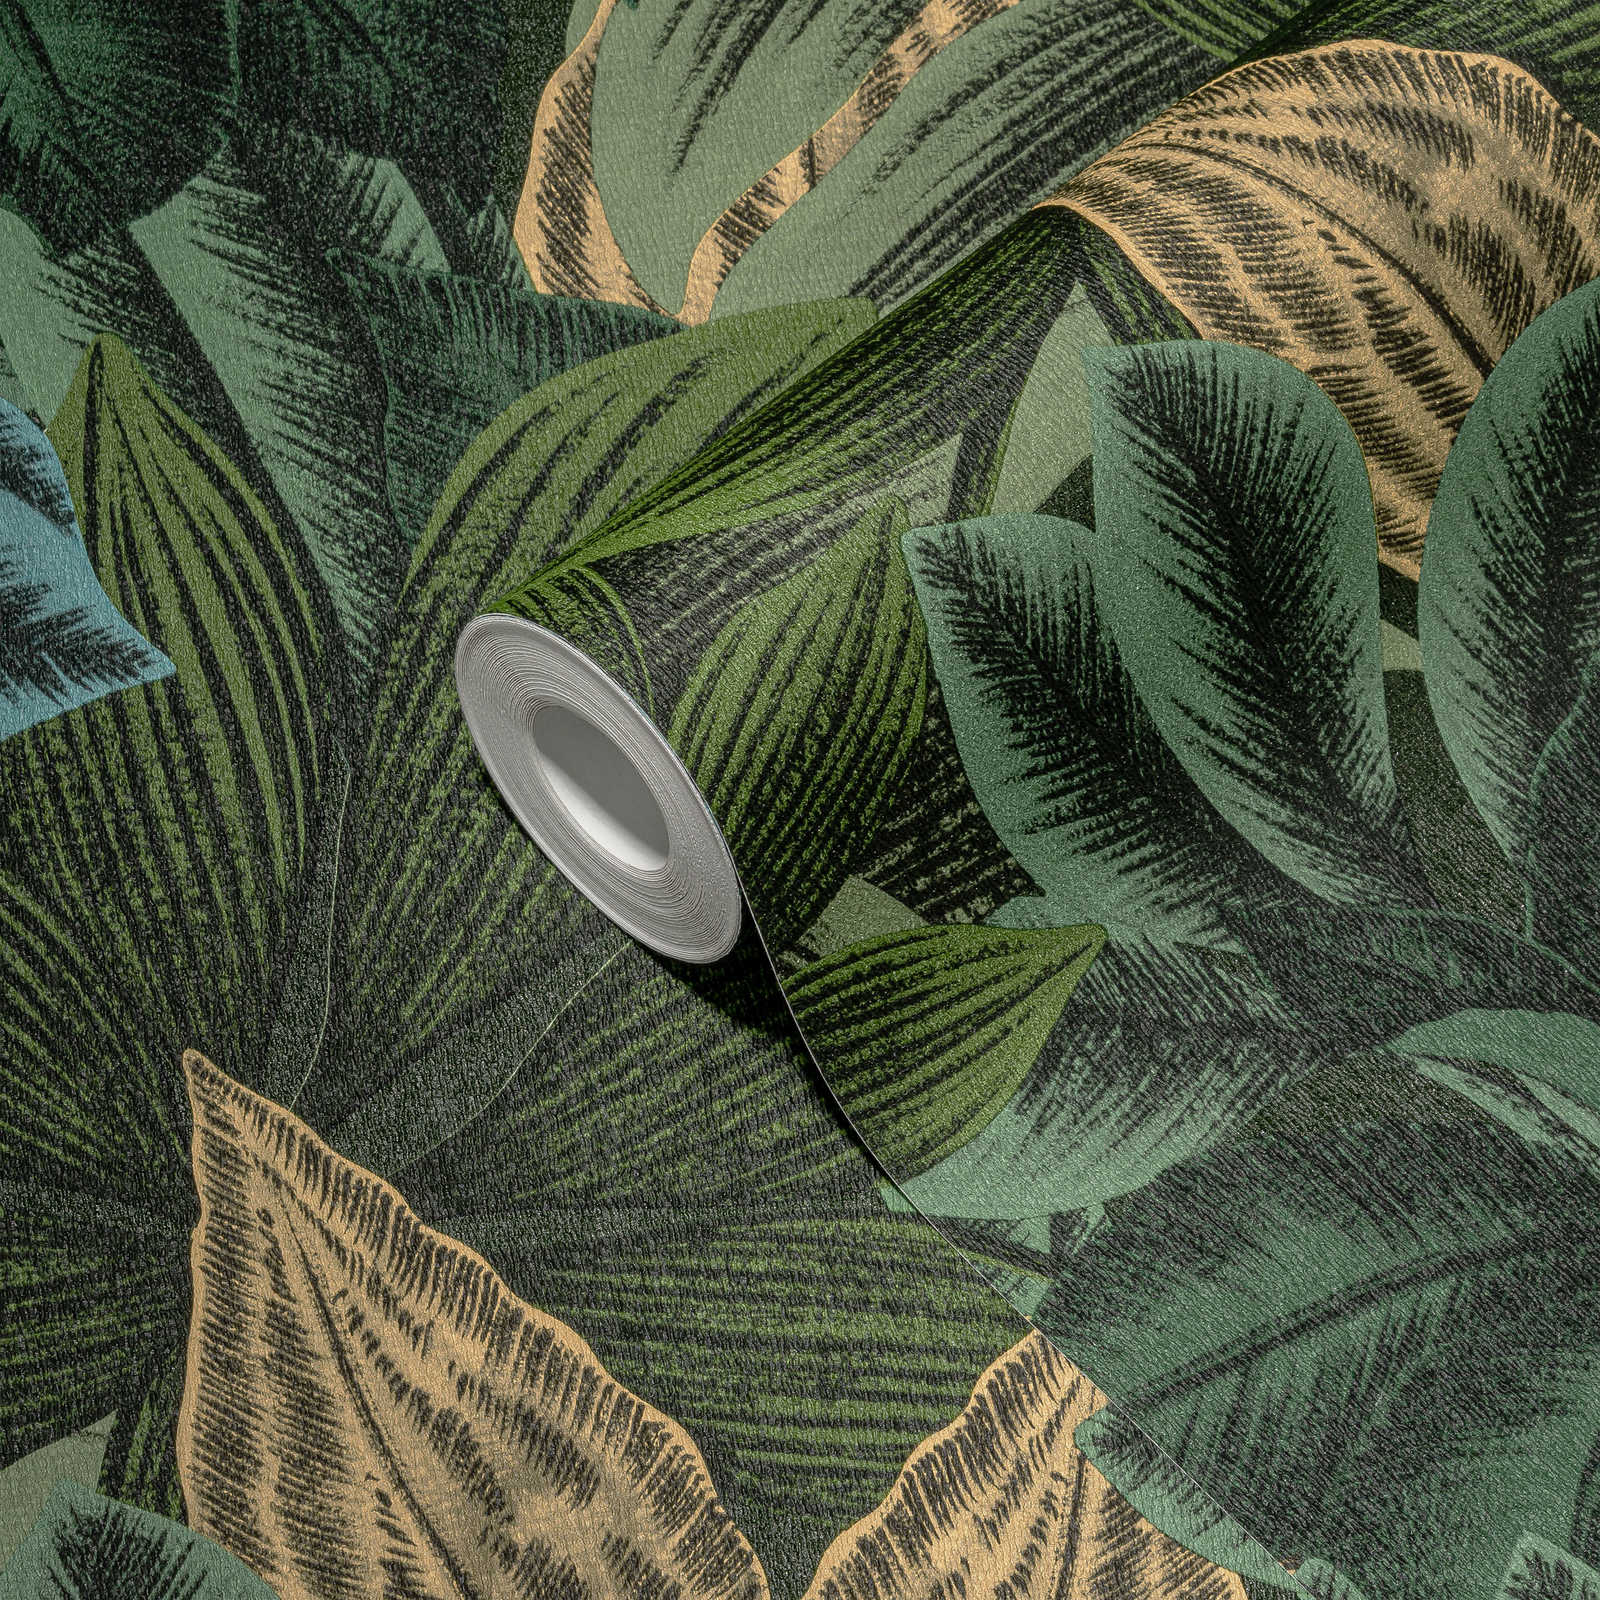             Jungle wallpaper with tropical leaf pattern - green, yellow
        